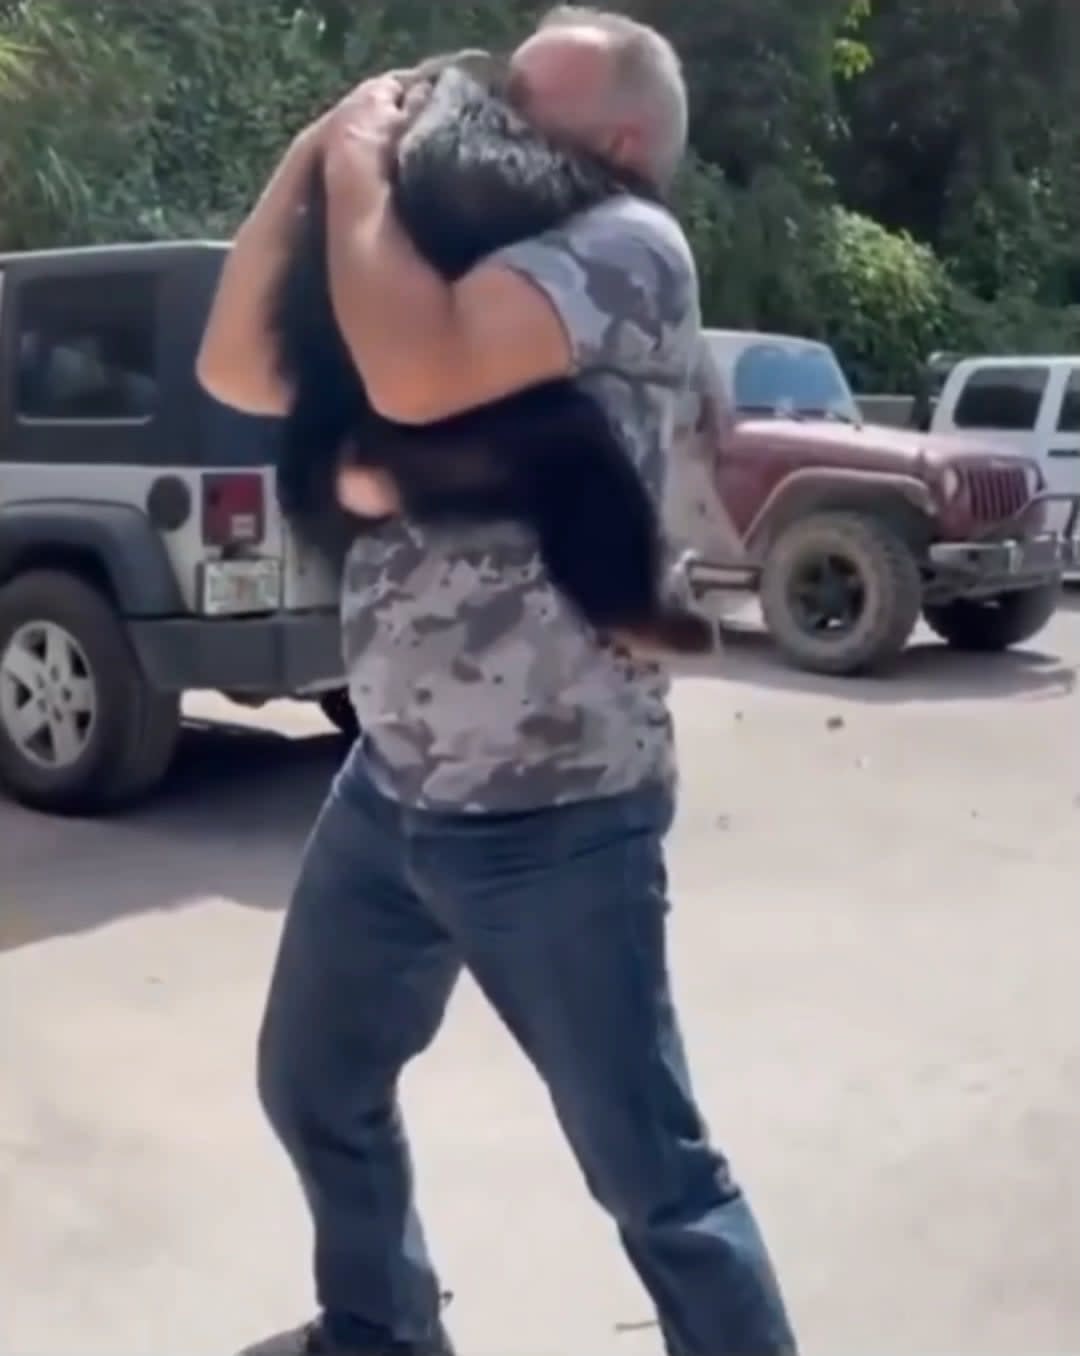 This chimp was born with broken ribs, had pneumonia and was abandoned by his own mother. This couple raised him and showed him love. This is how he reacts whenever he sees them now!